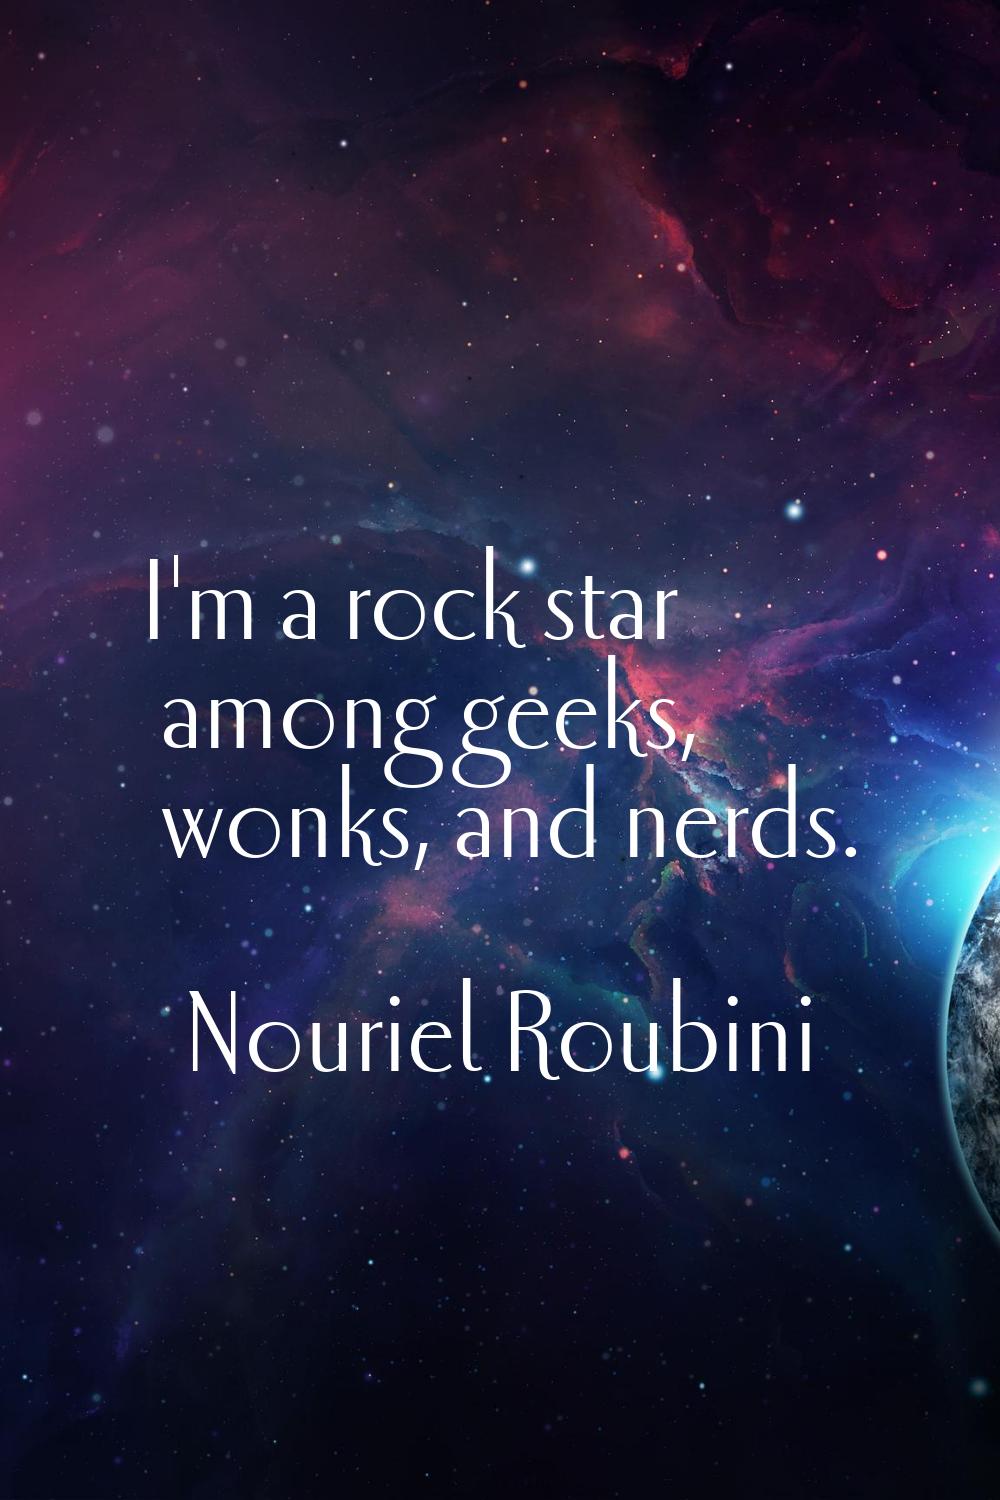 I'm a rock star among geeks, wonks, and nerds.